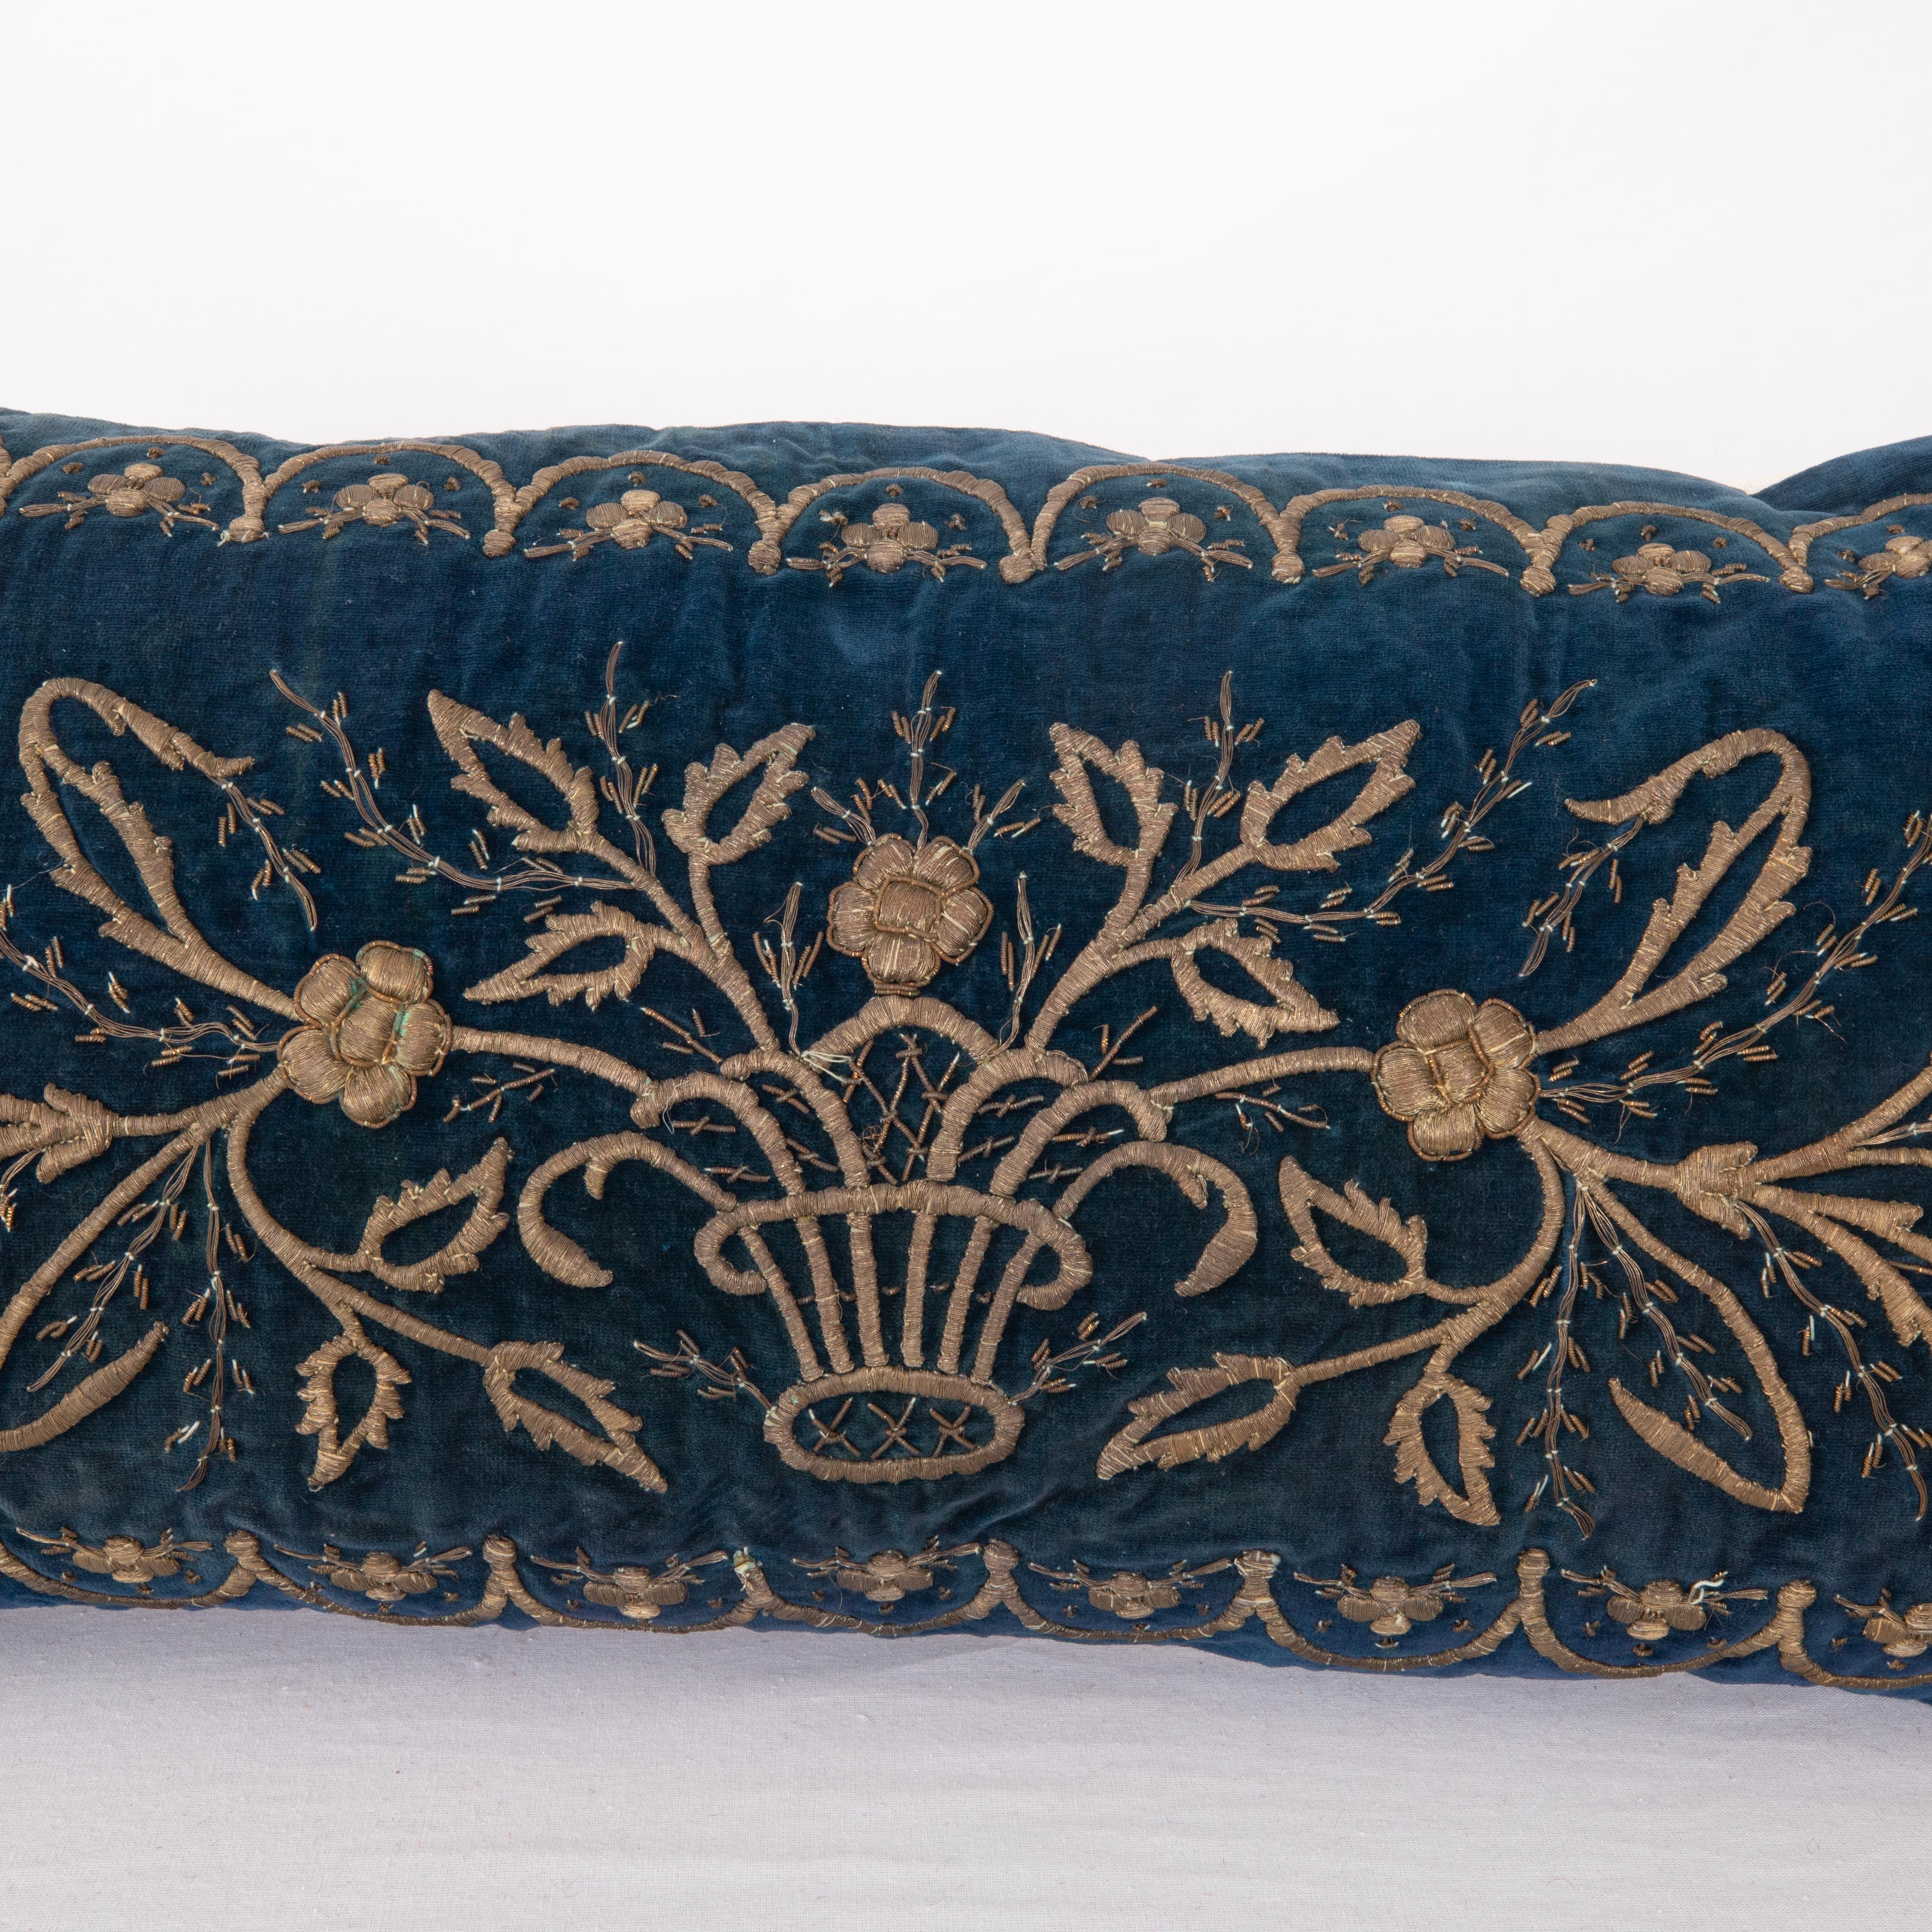 Embroidered Antique Silk Velvet Ottoman Sarma Pillow Cover, L 19th Century For Sale